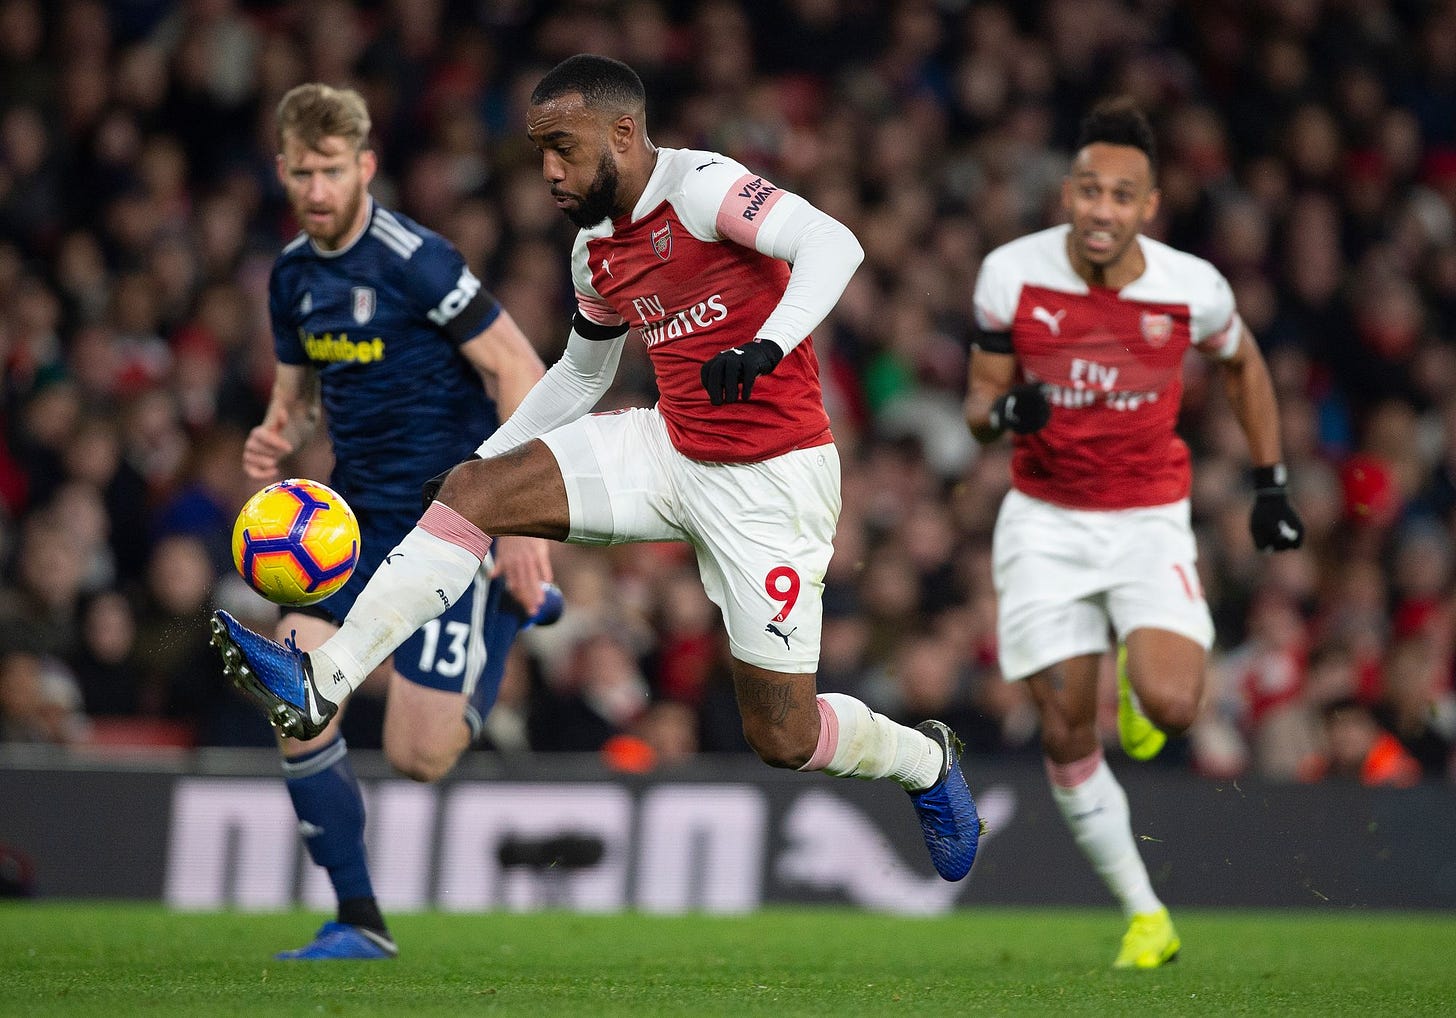 Fulham vs Arsenal: Stats Preview